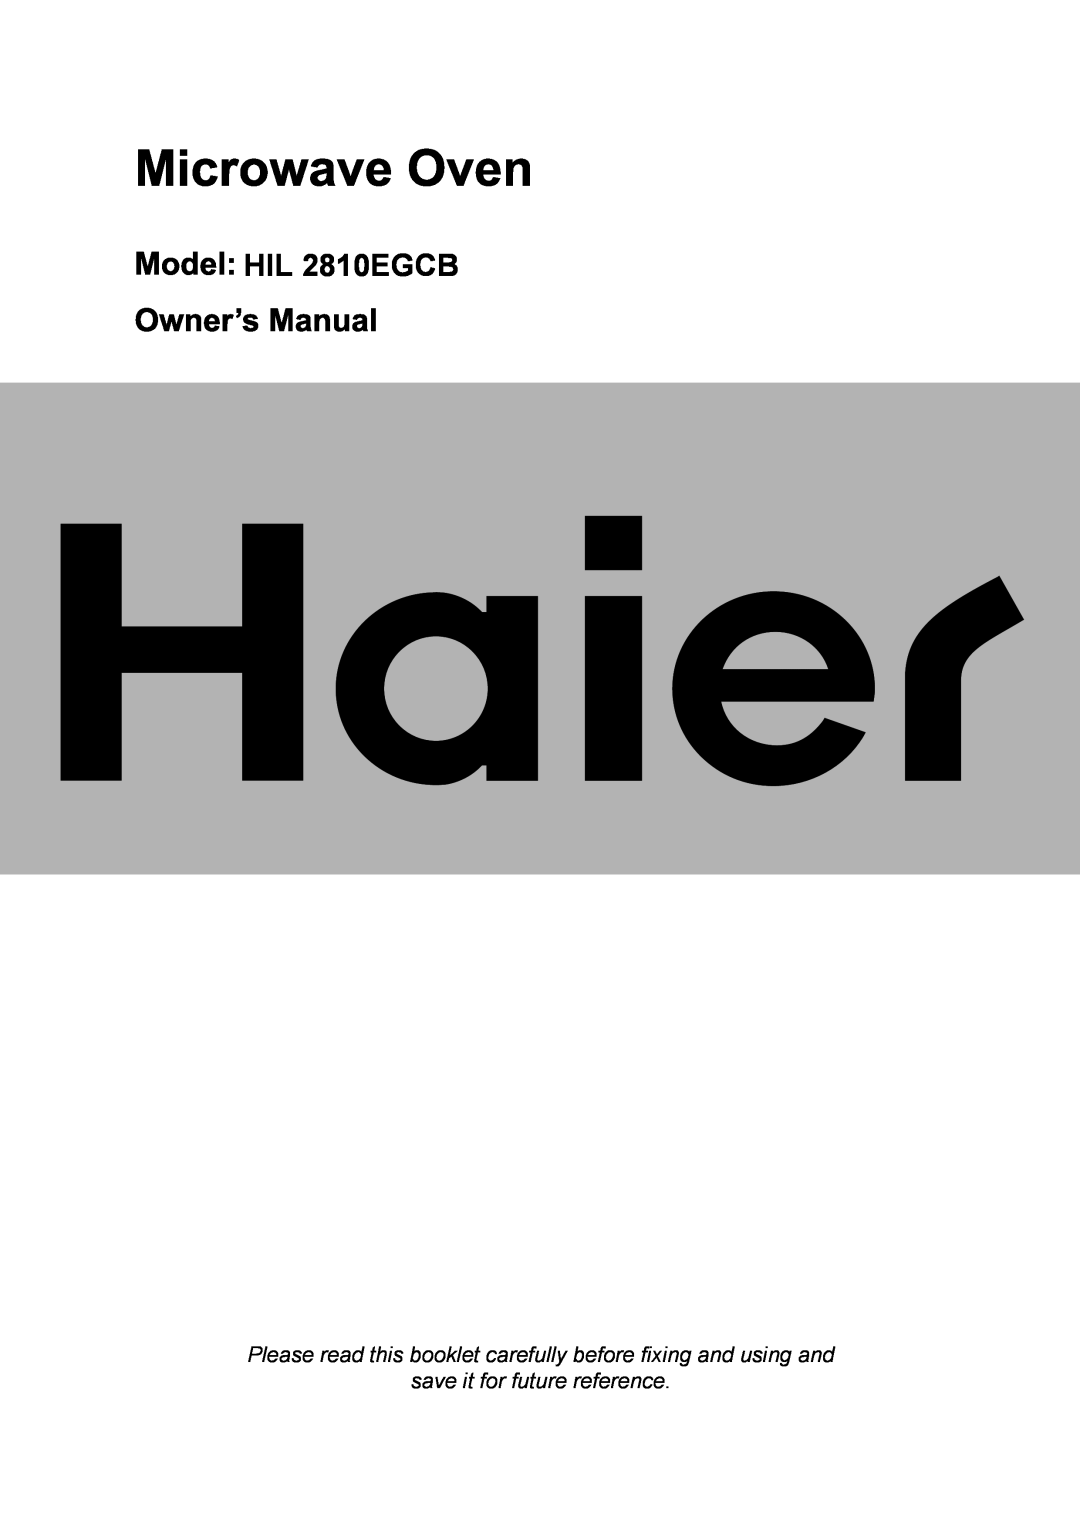 Haier HIL 2810EGCB manual Please read this booklet carefully before fixing and using and, save it for future reference 